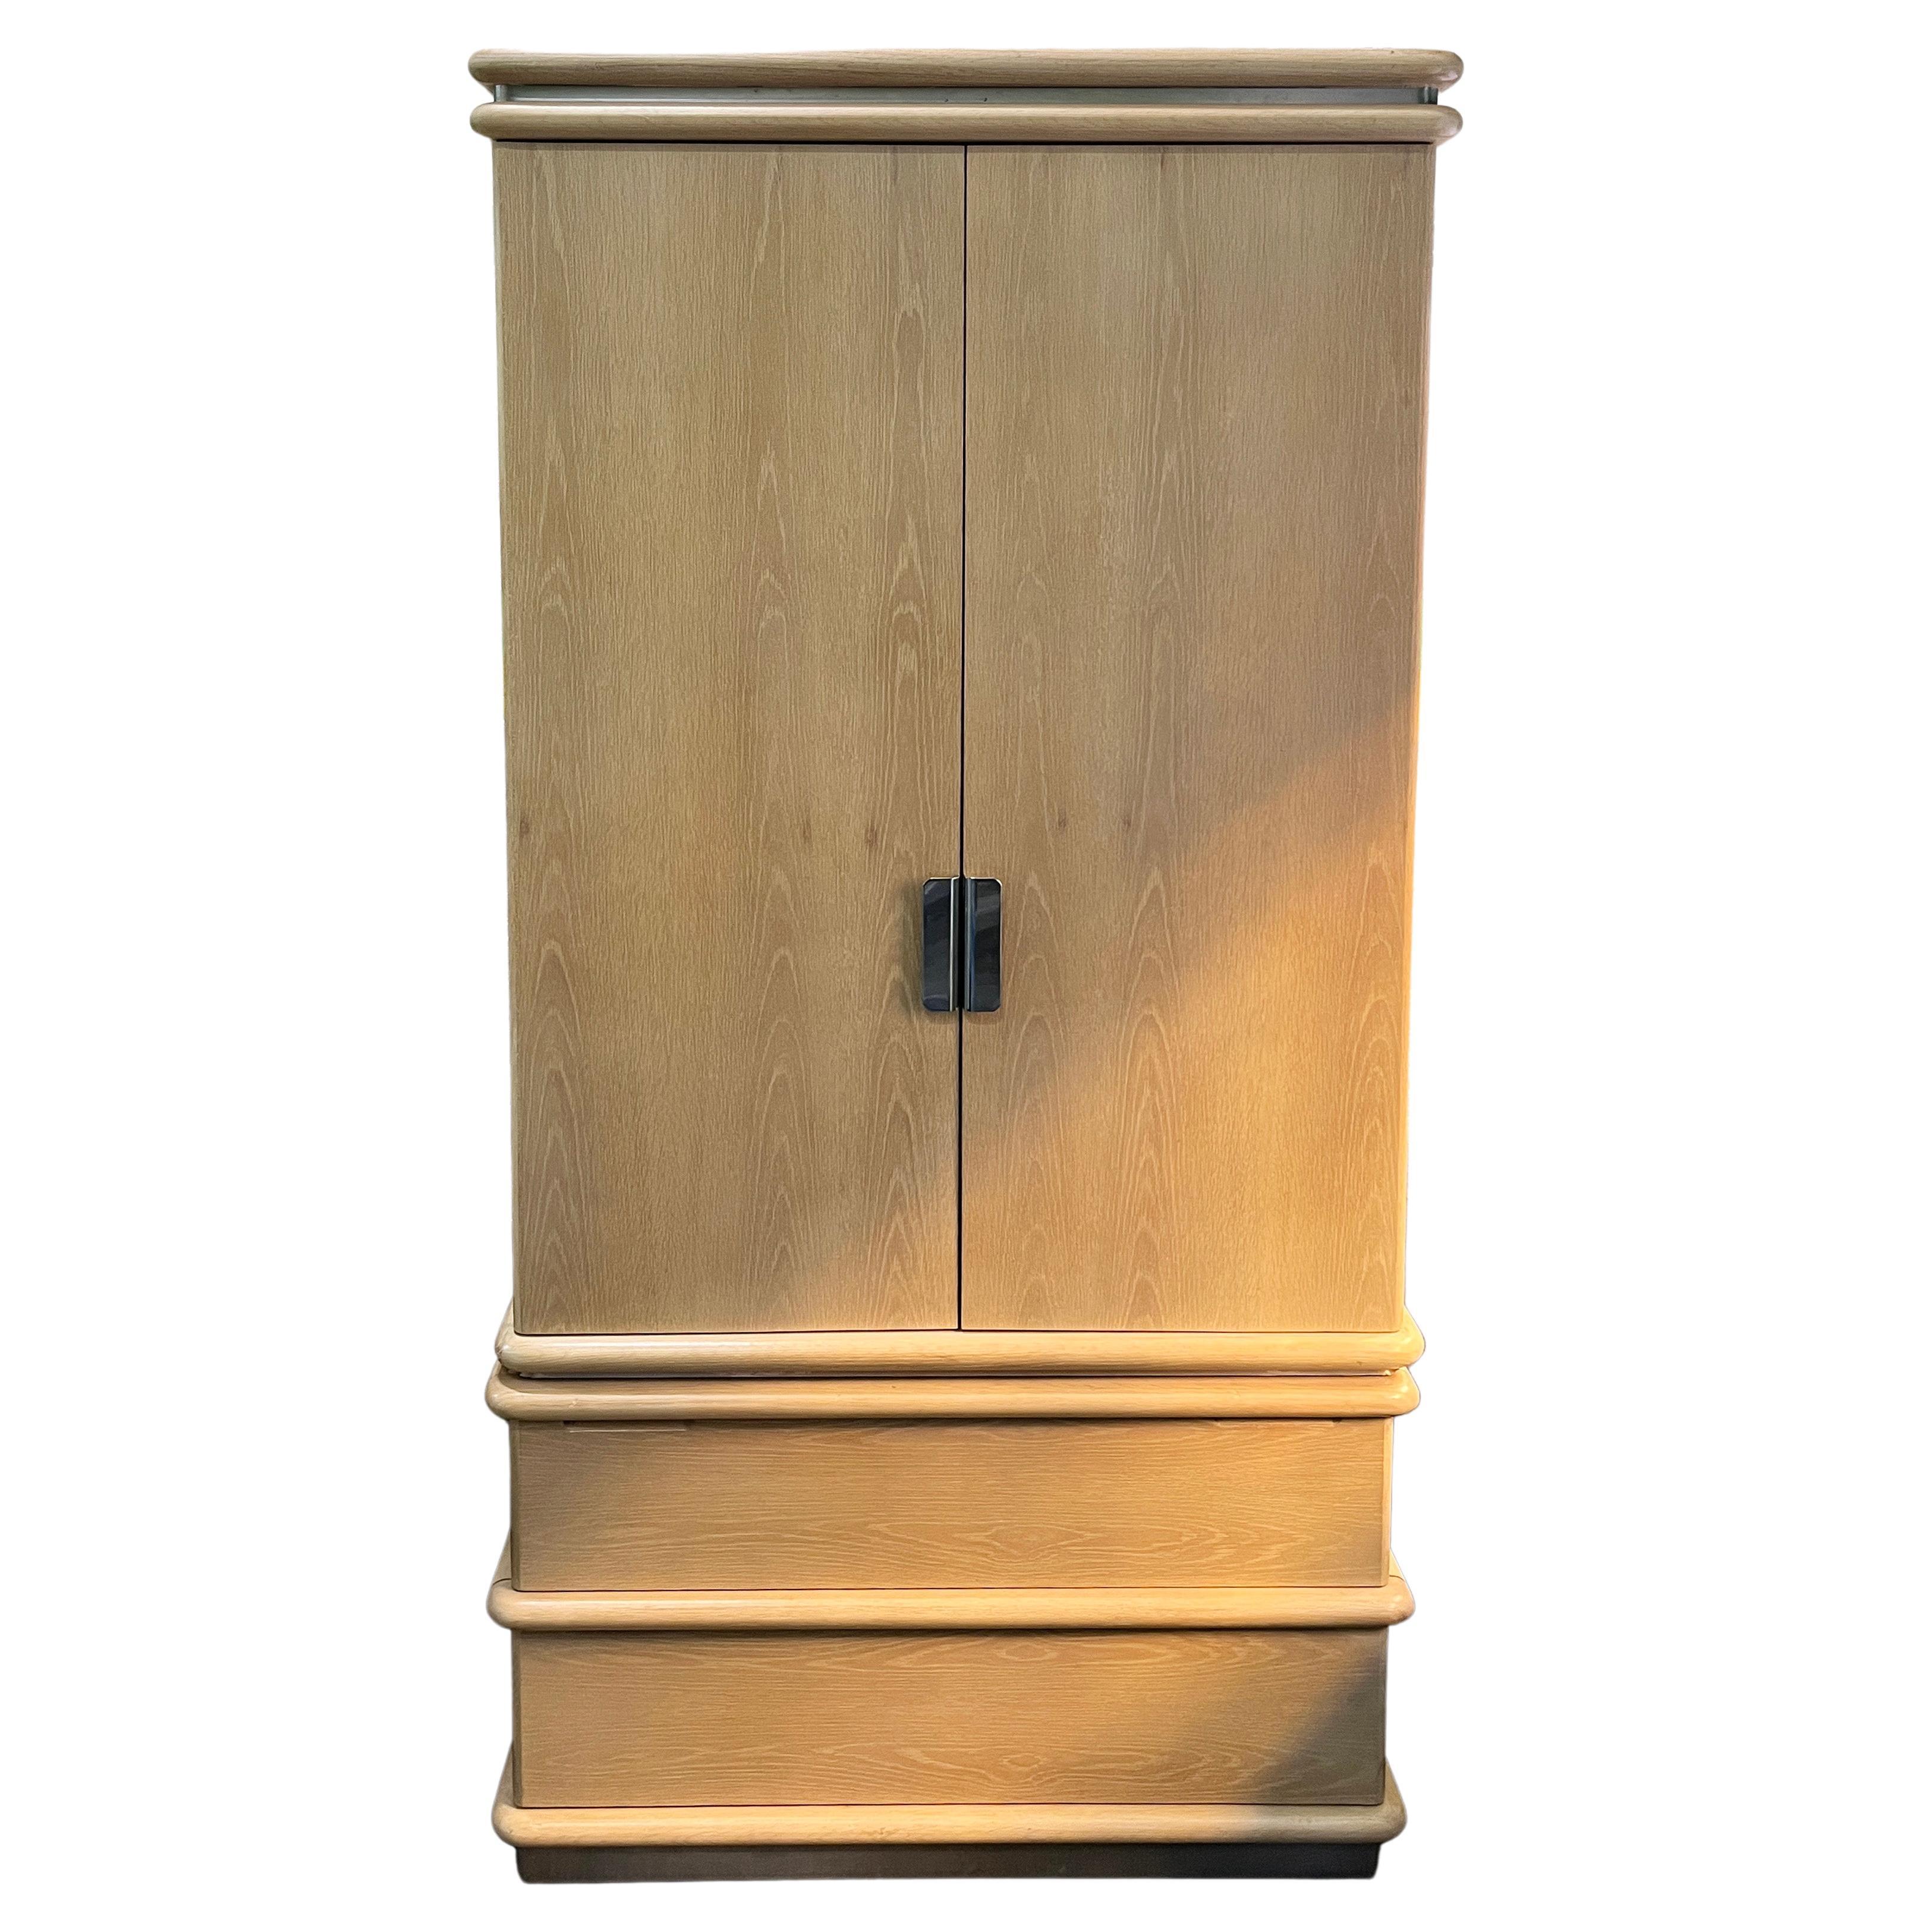 Jay Spectre Tall Ribbed Armoire, 1980s (Signed)